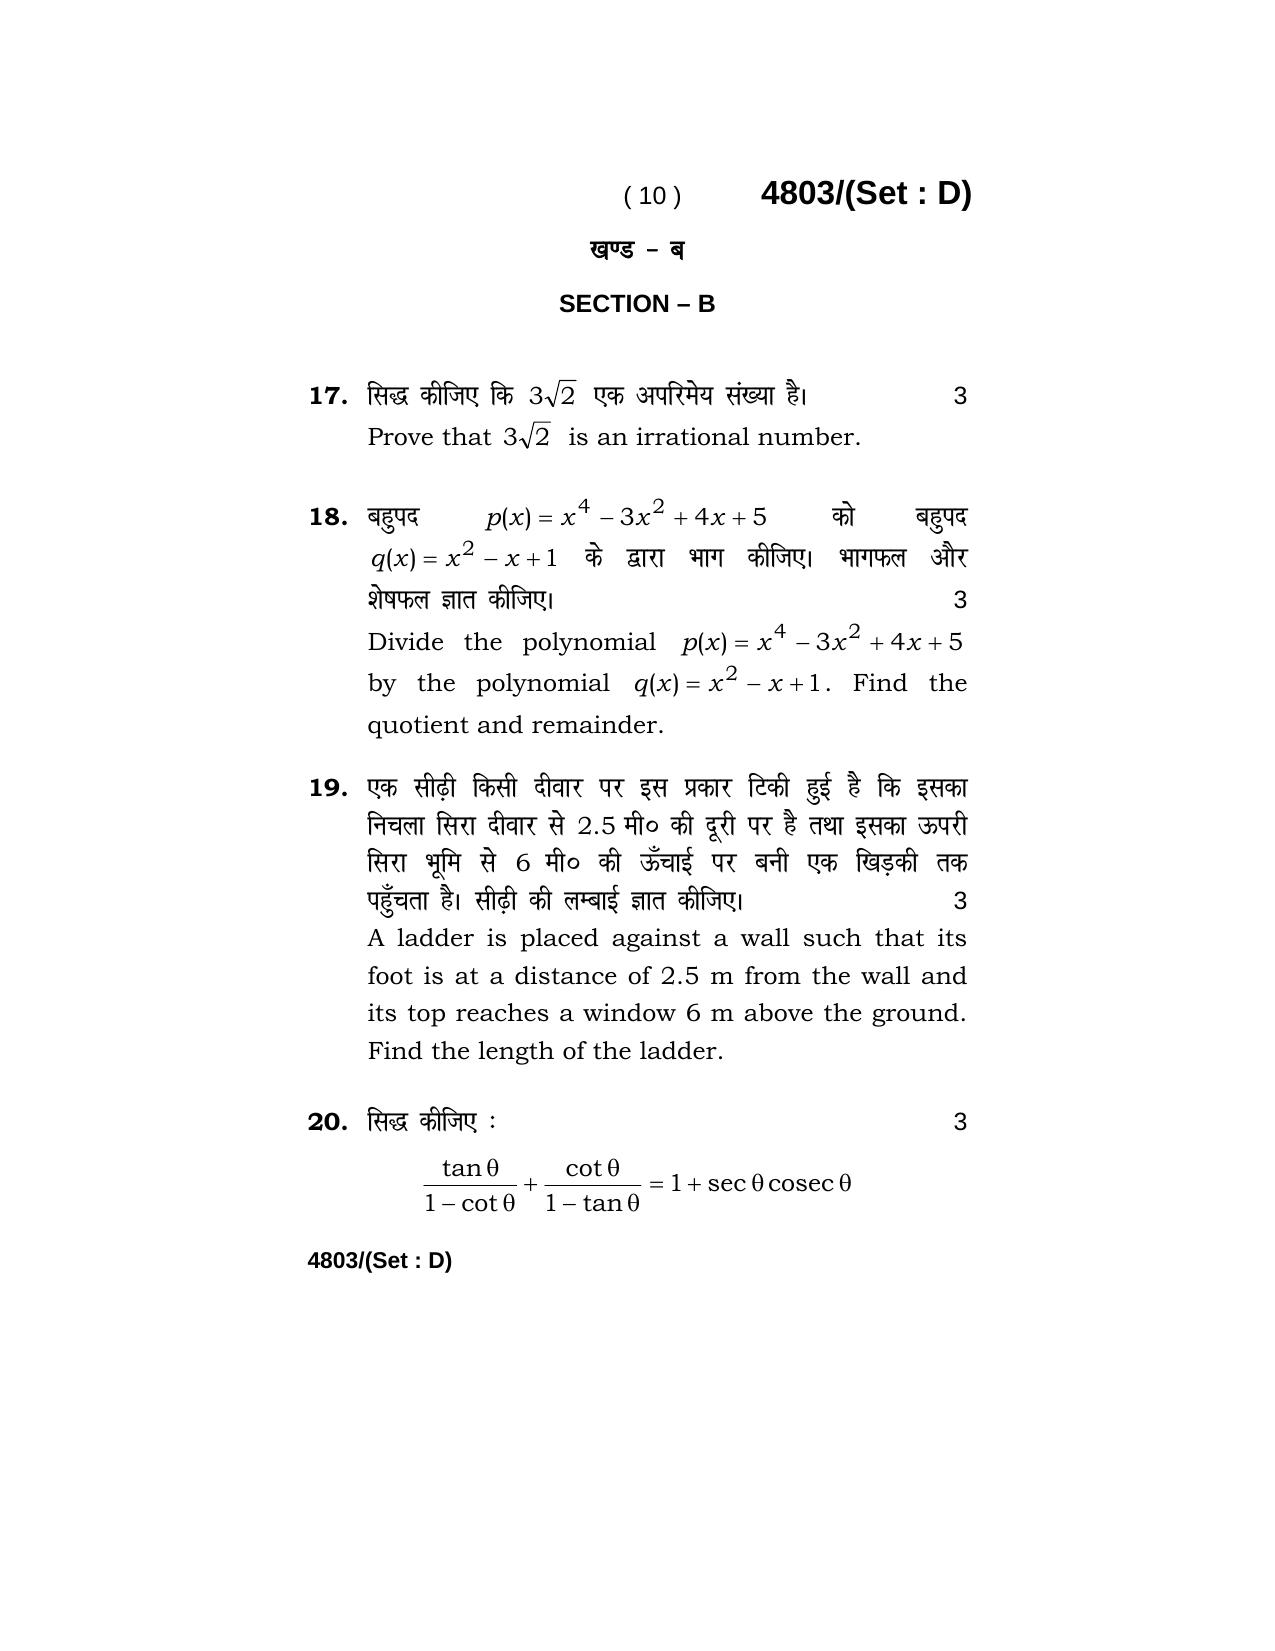 Haryana Board HBSE Class 10 Mathematics 2020 Question Paper - Page 58